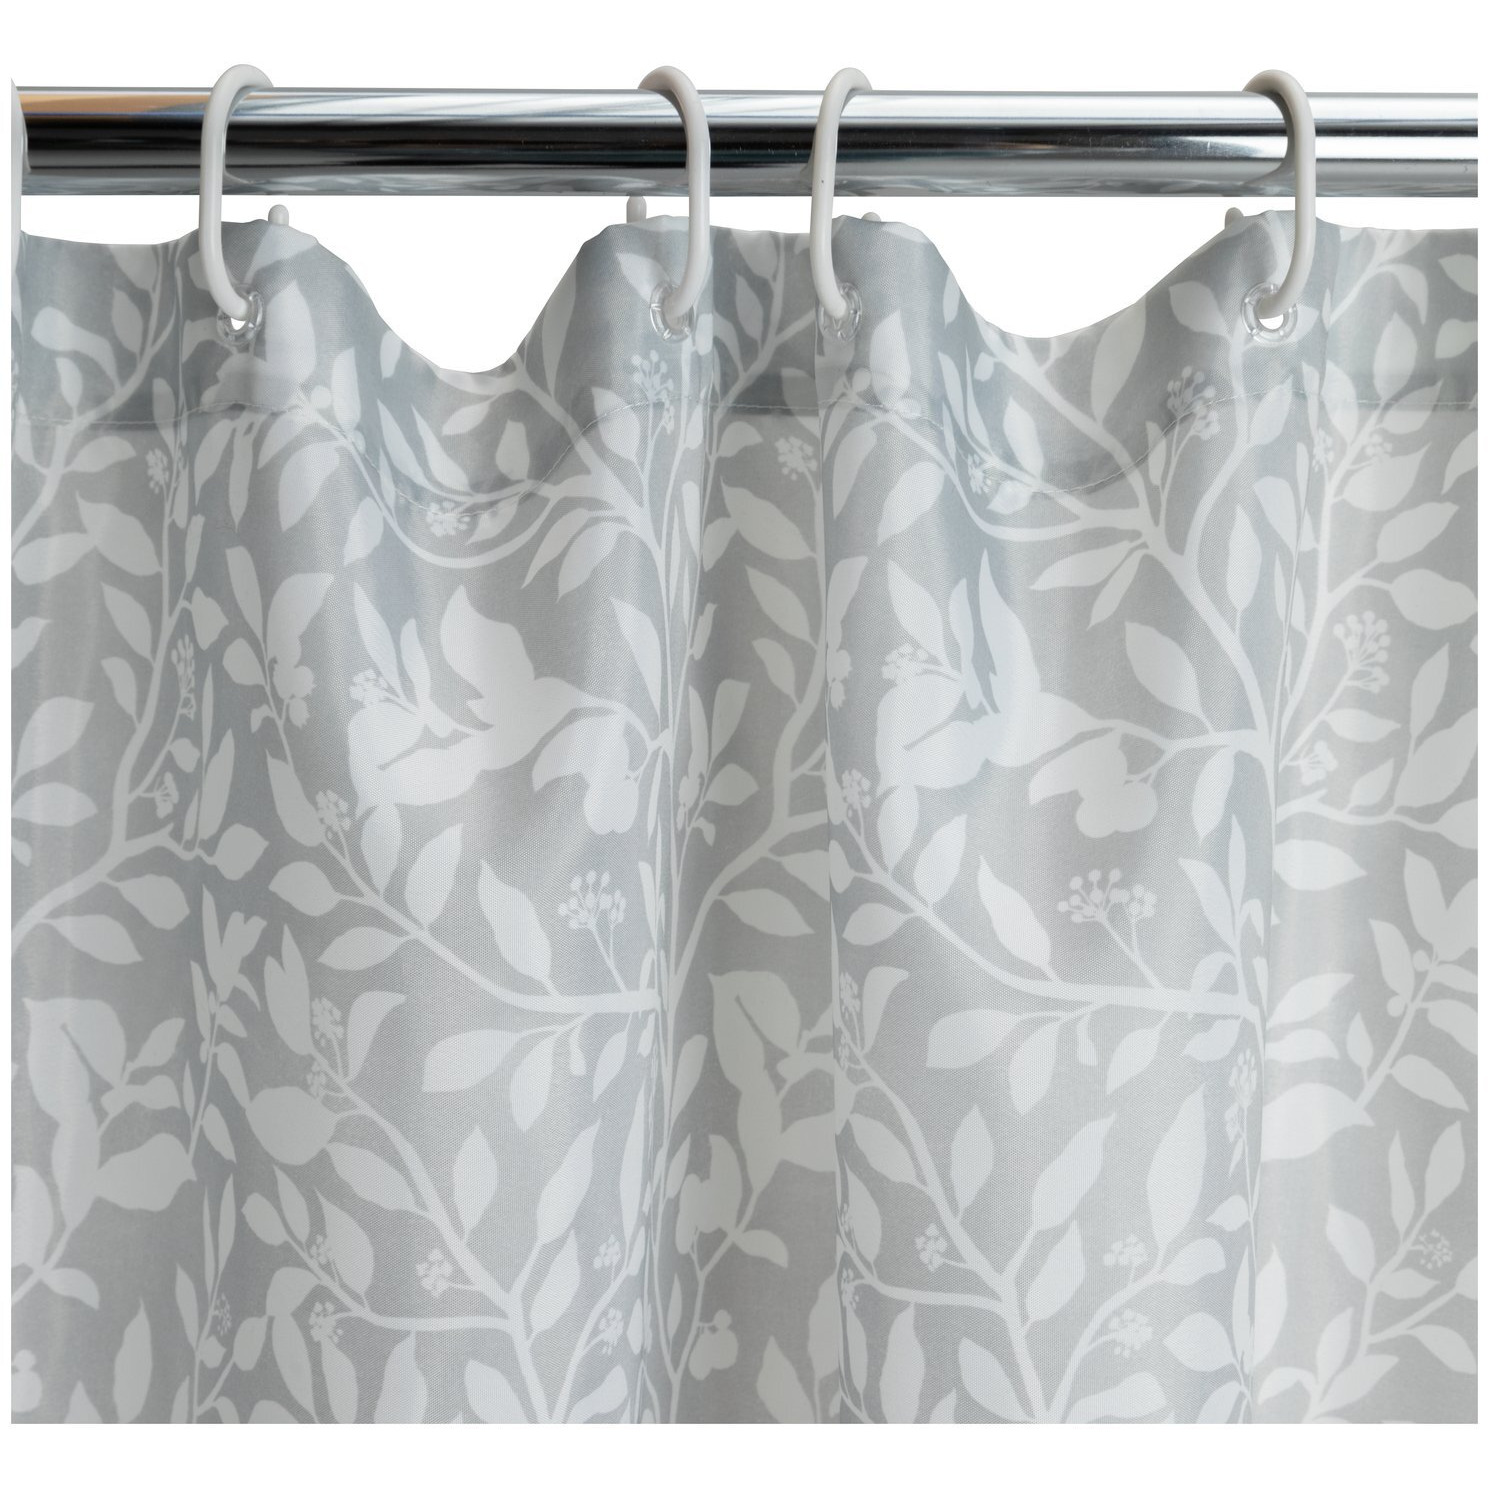 Argos Home Floral Shower Curtain - Grey - image 1